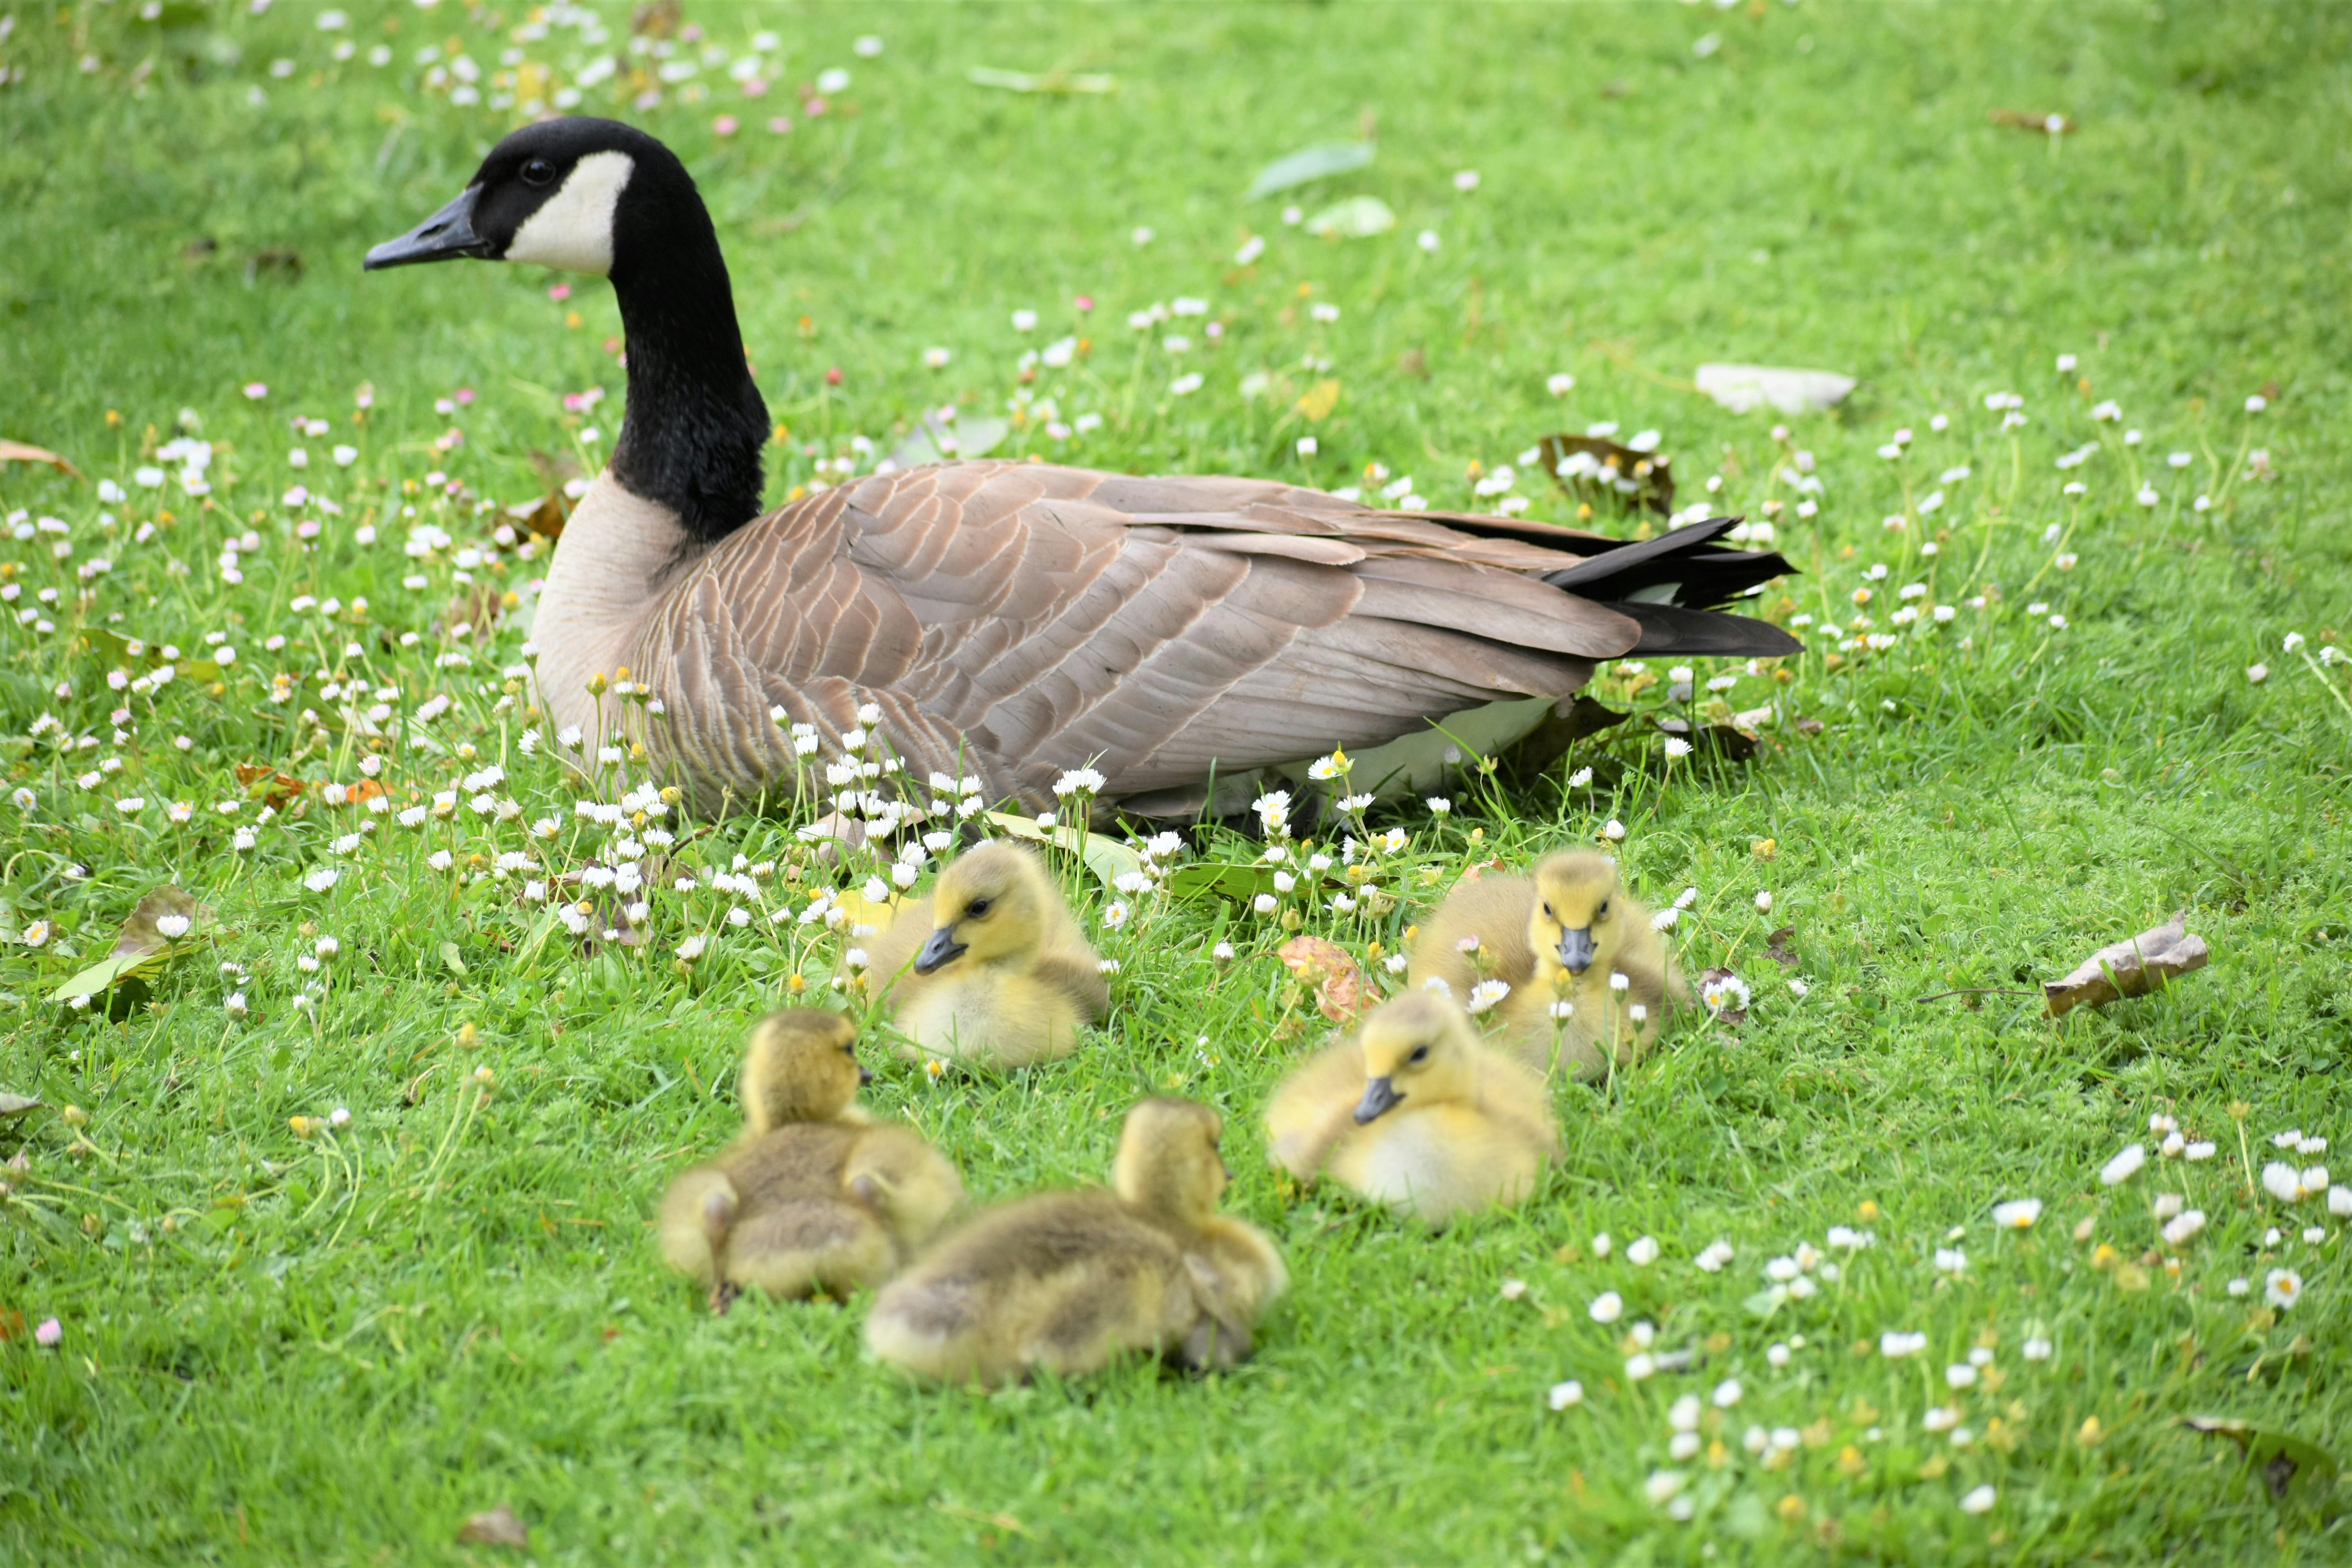 mama goose and flock of goslings resting on grass